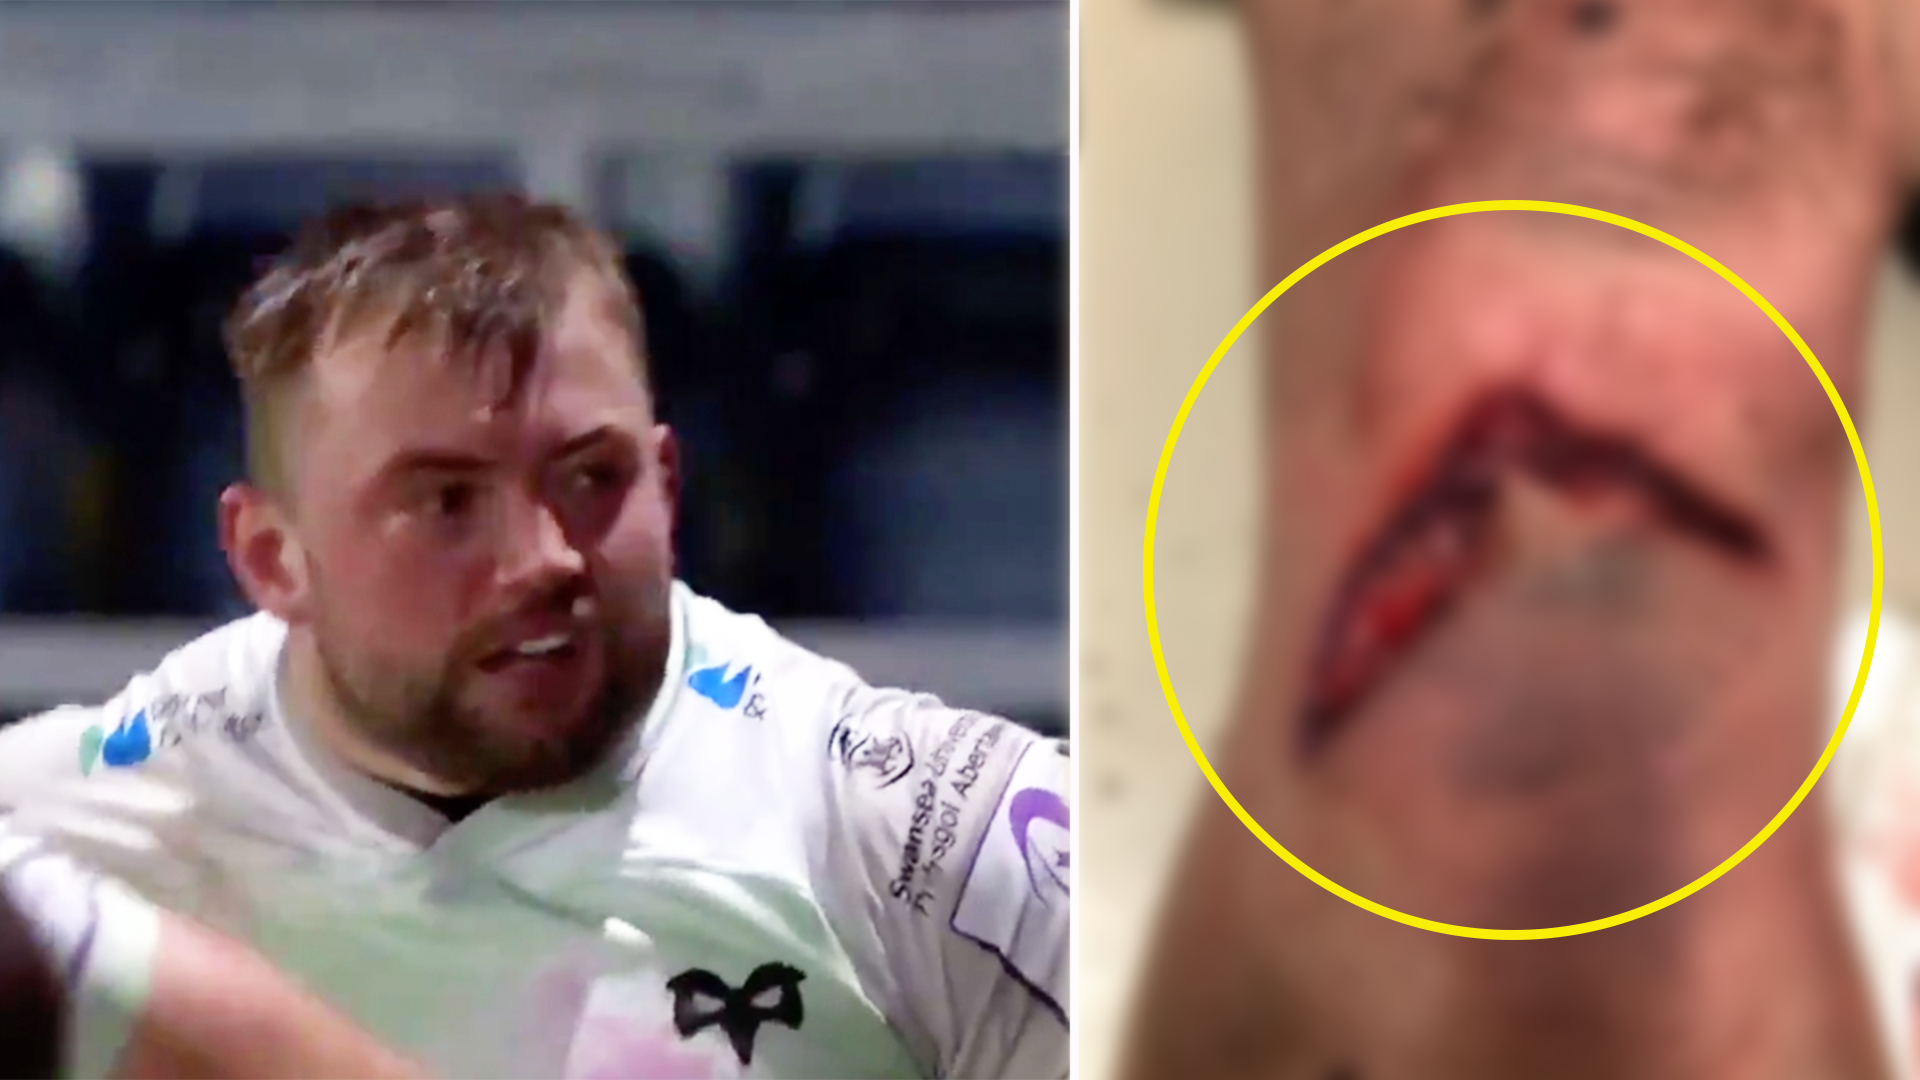 Ospreys hooker shocks fans revealing horrific injuries sustained in last night's Challenge Cup clash